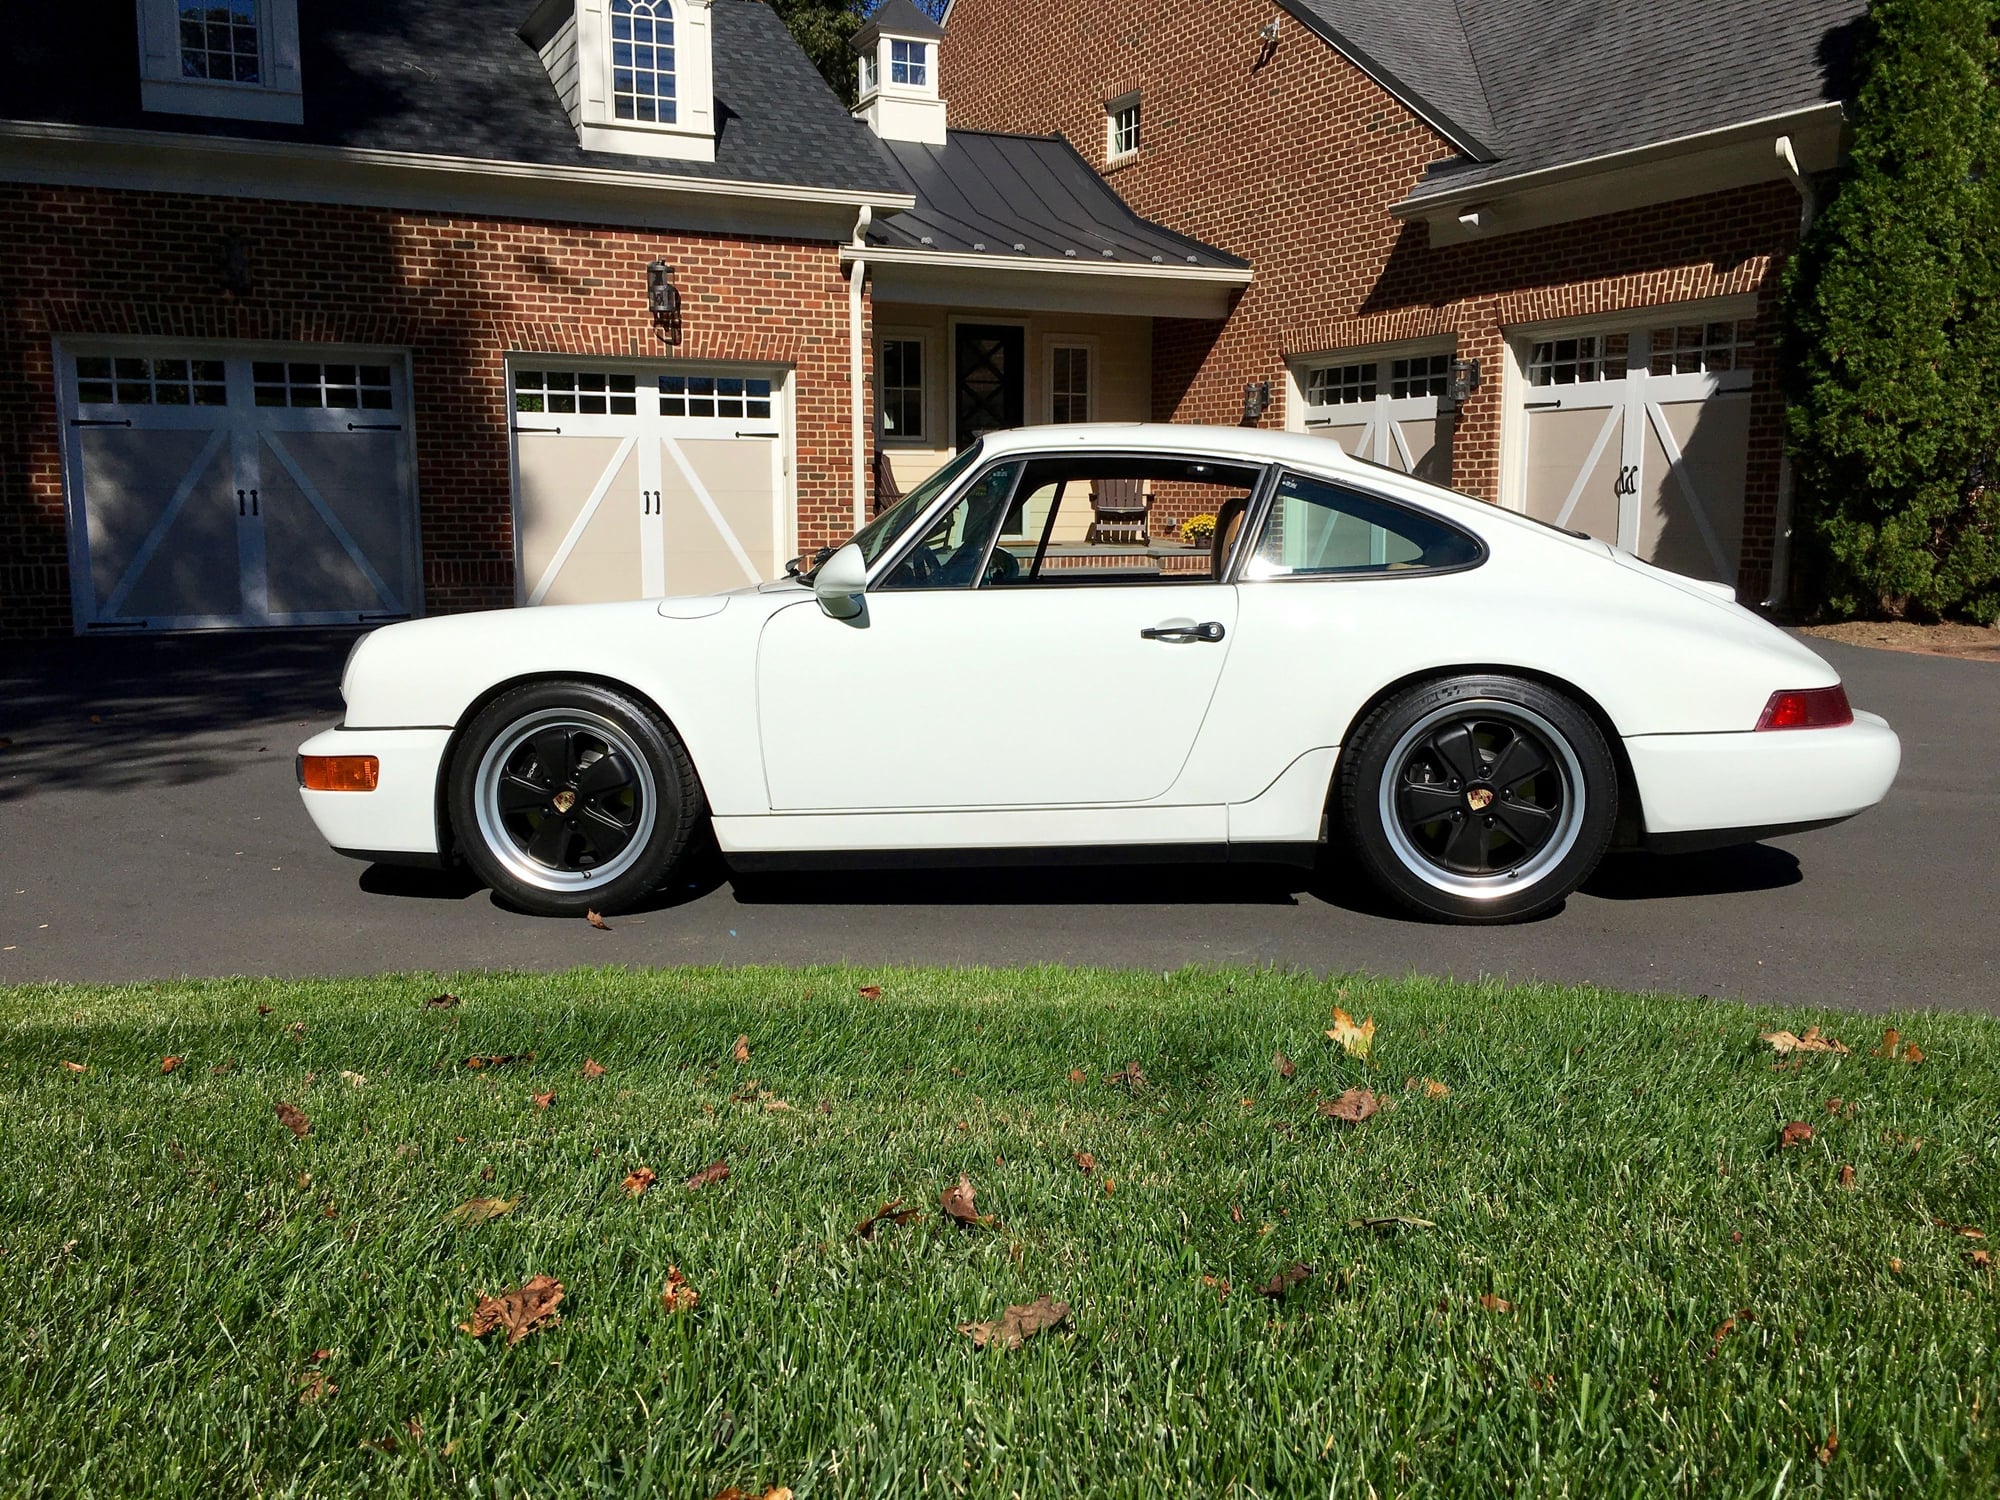 1993 Porsche 911 - 964 C4 Manual Coupe, 3.8L, Very Well Sorted - Used - VIN WP0AB2968PS420167 - 138,000 Miles - 6 cyl - 4WD - Manual - Coupe - White - Northern Virginia, VA 22124, United States